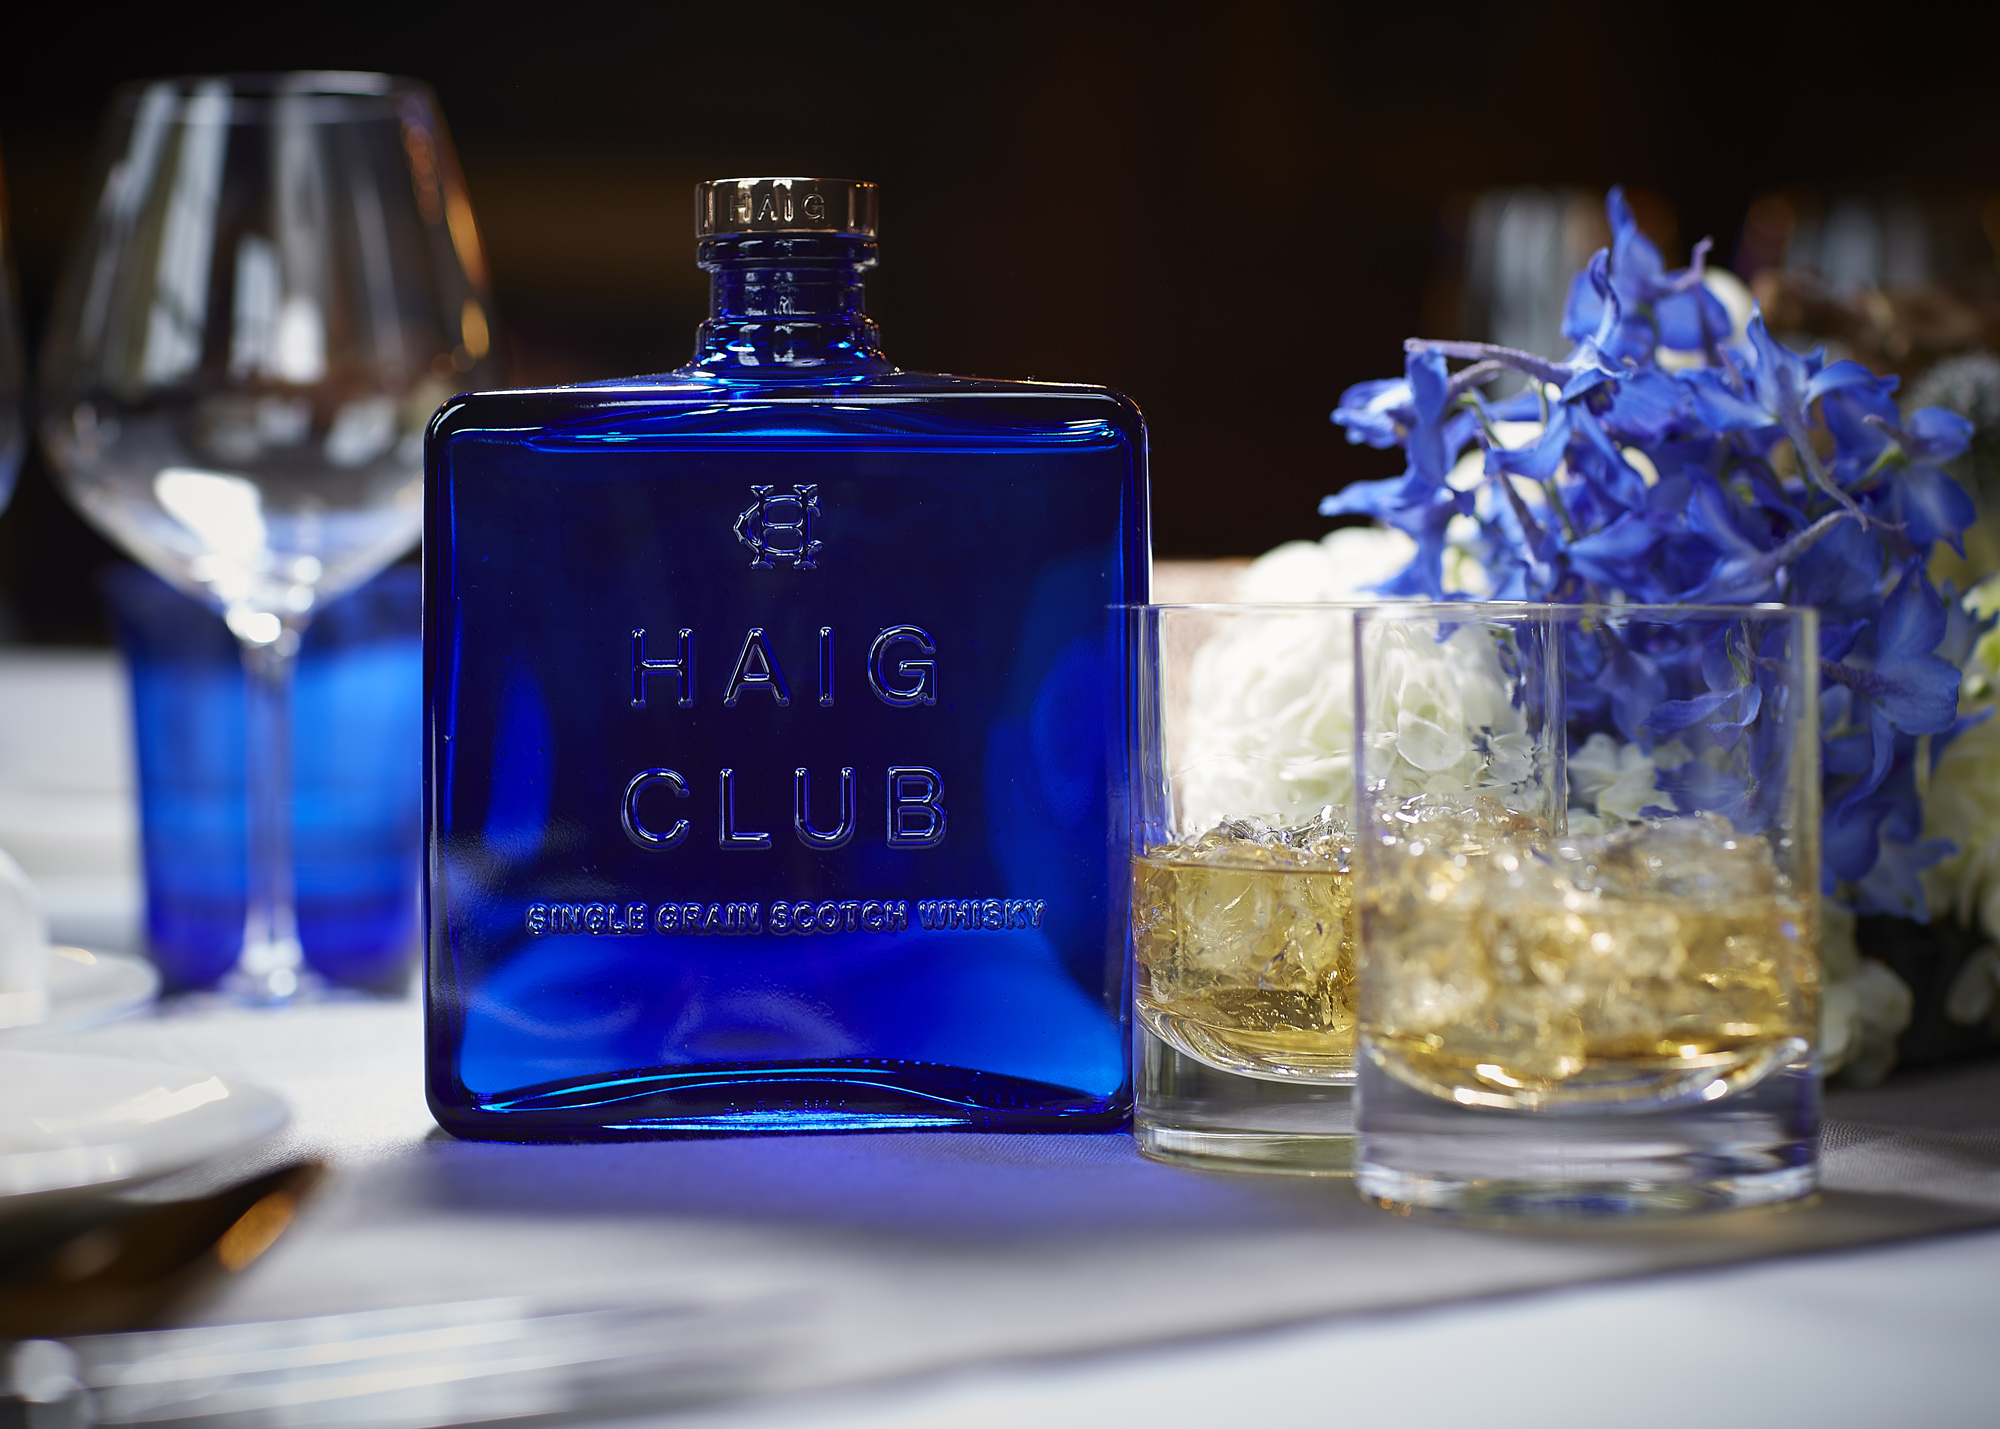 The Perfect Gift - Haig Club Limited Edition Bottle